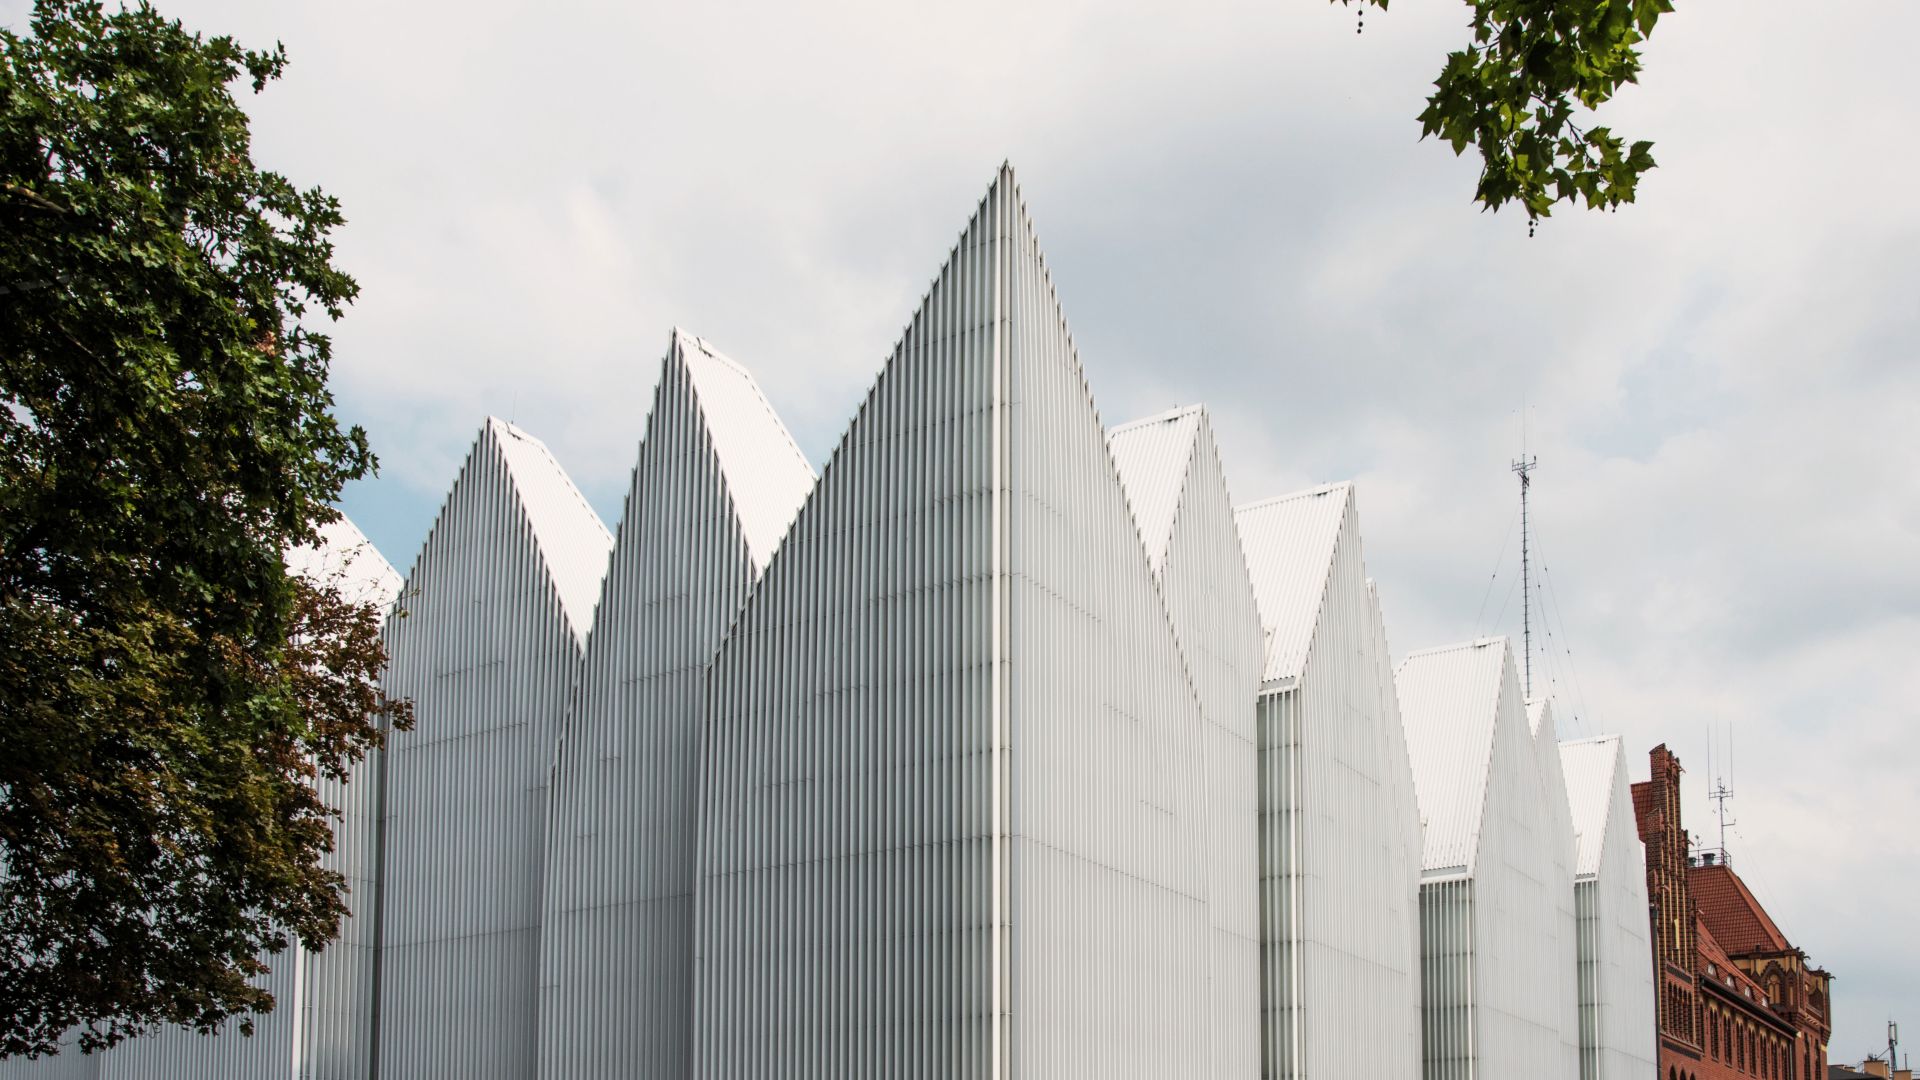 White facade of Szczecin Philharmonic Hall contrasting with old red buildings